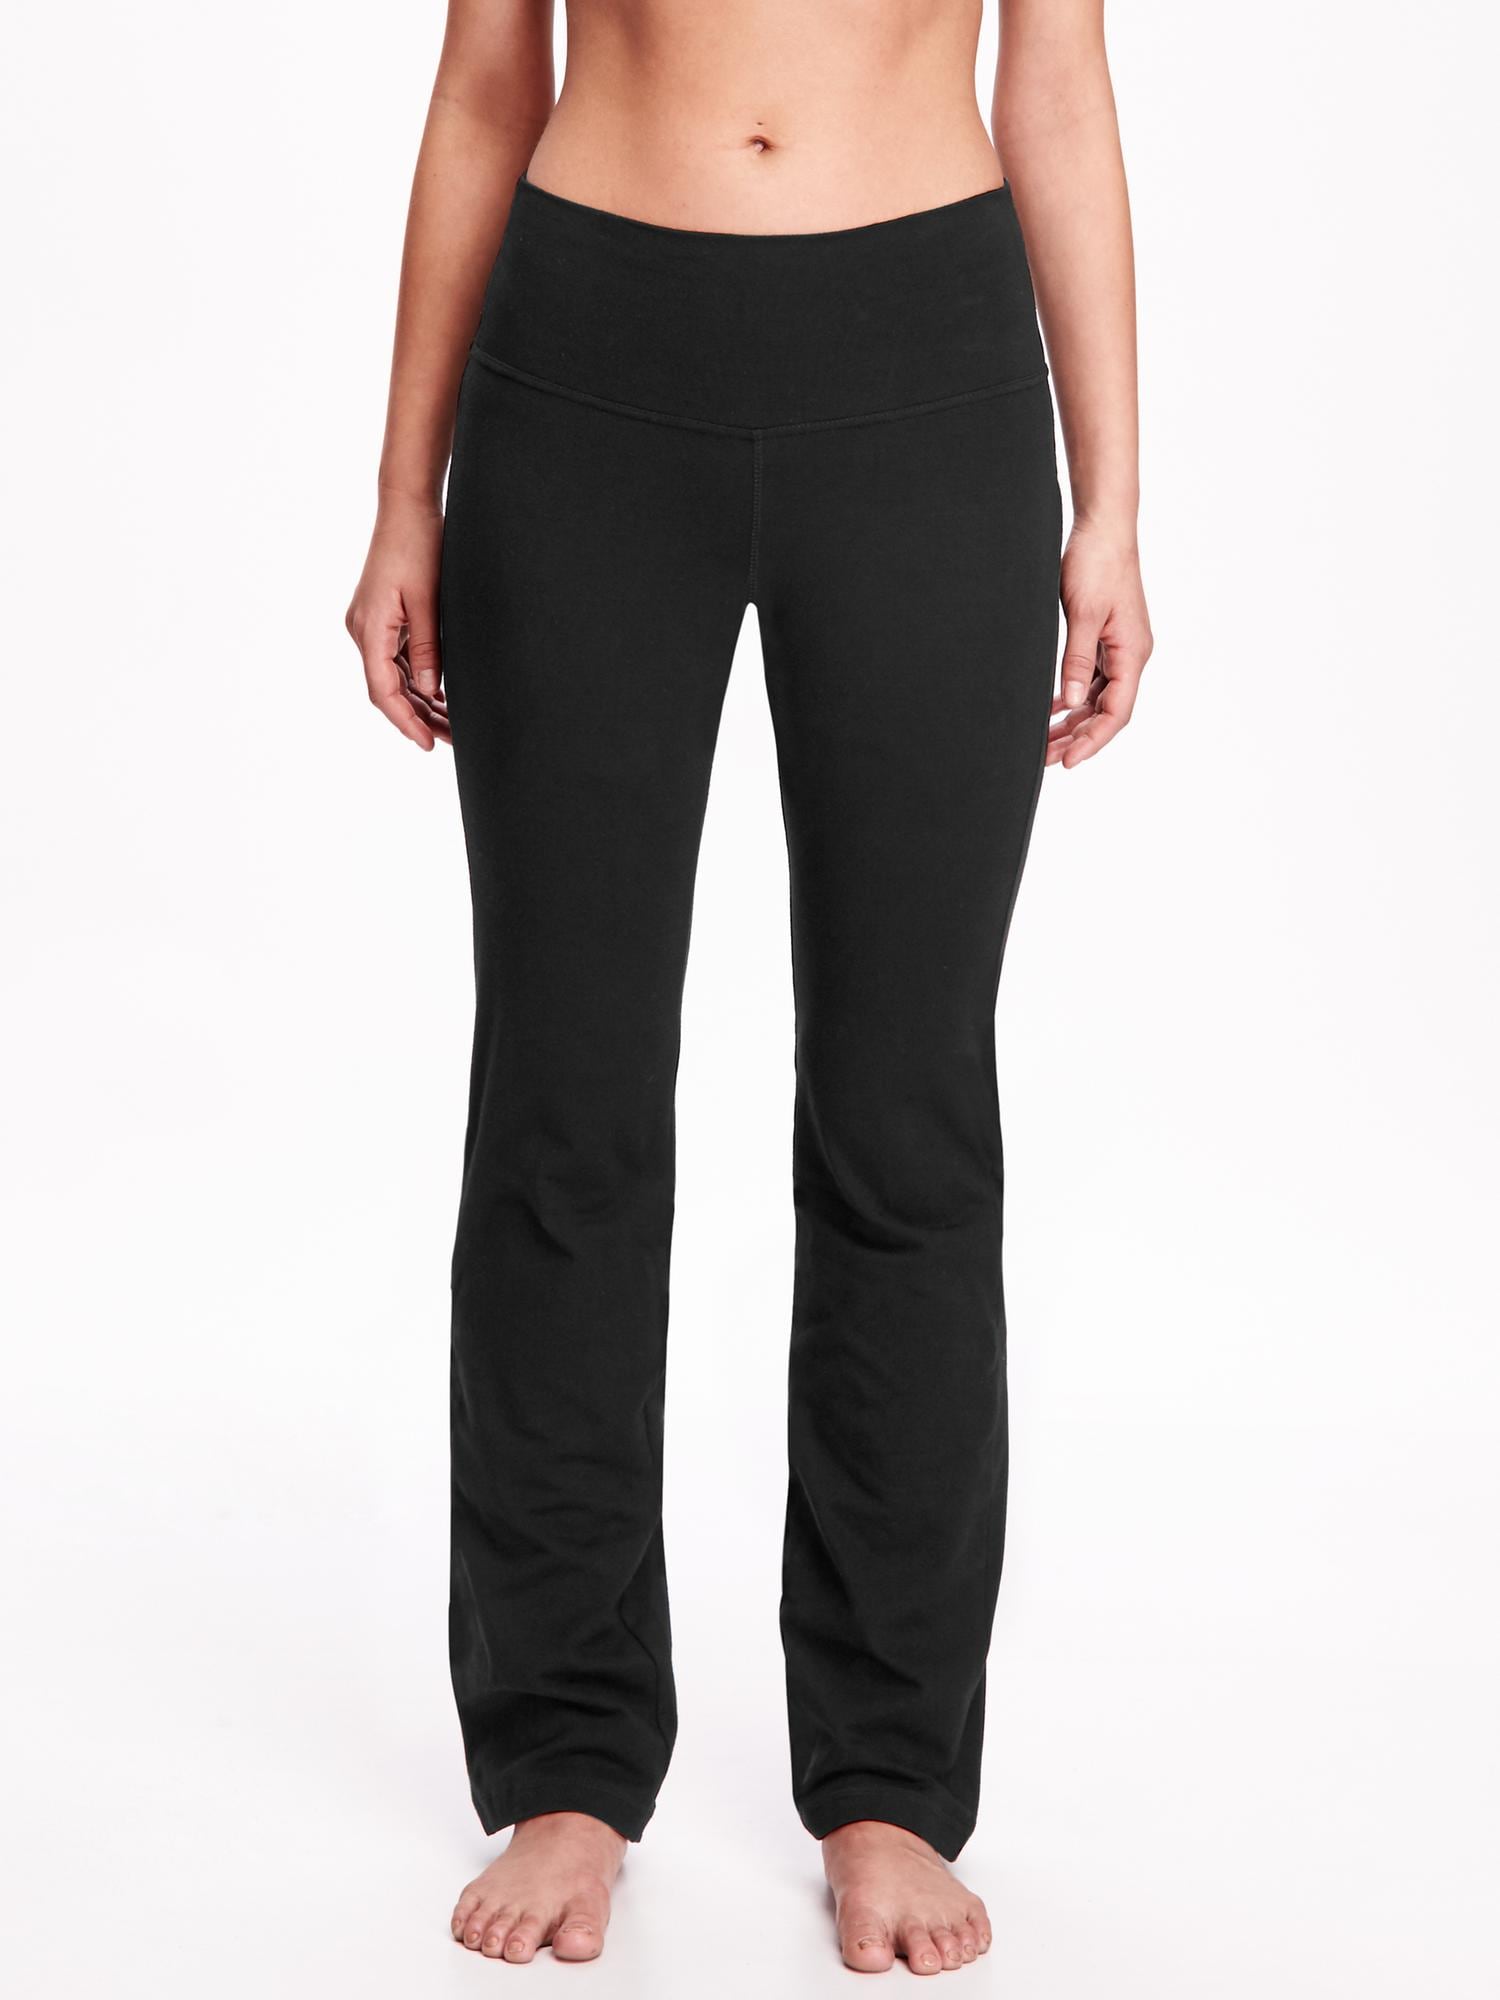 Active by Old Navy Solid Black Yoga Pants Size XL - 48% off